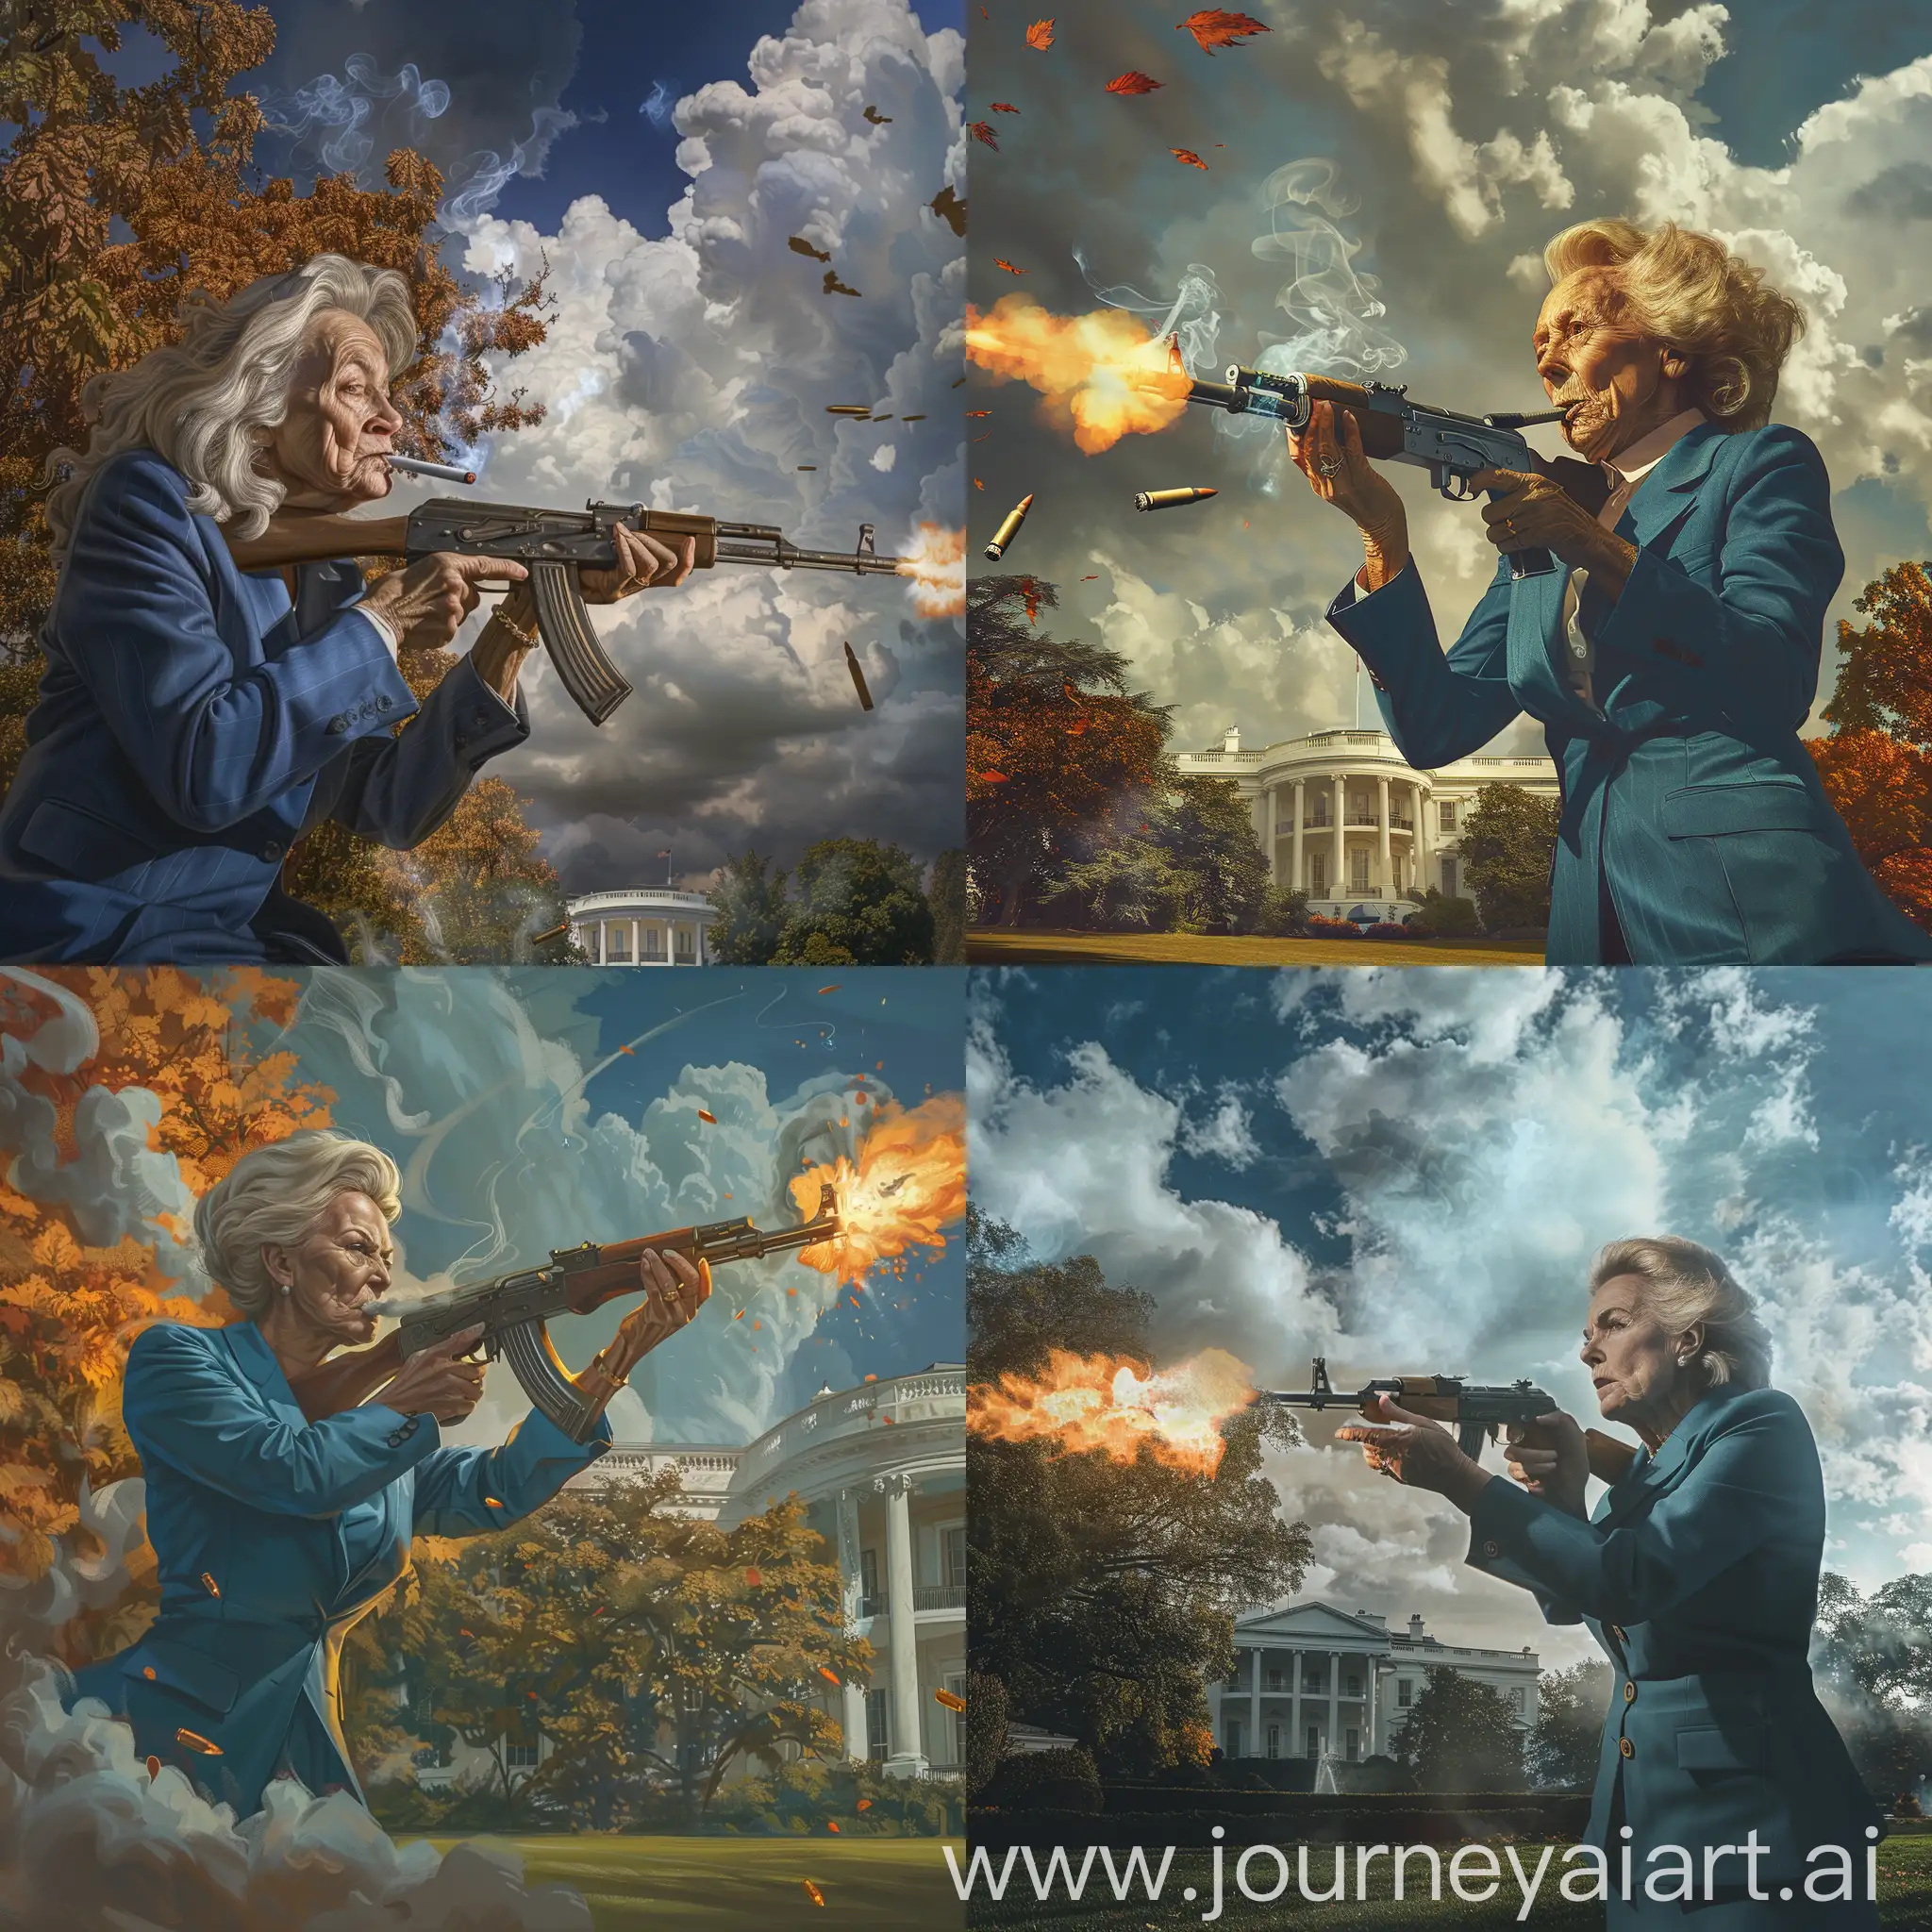 birdview, ultradetailed,60yearsold realface hilary, whole body,wear blue suit, playing real look soviet ak-47 rifle firing on whitehouse lawn, realhandfingers,smoking around ,autumn, cloudy,